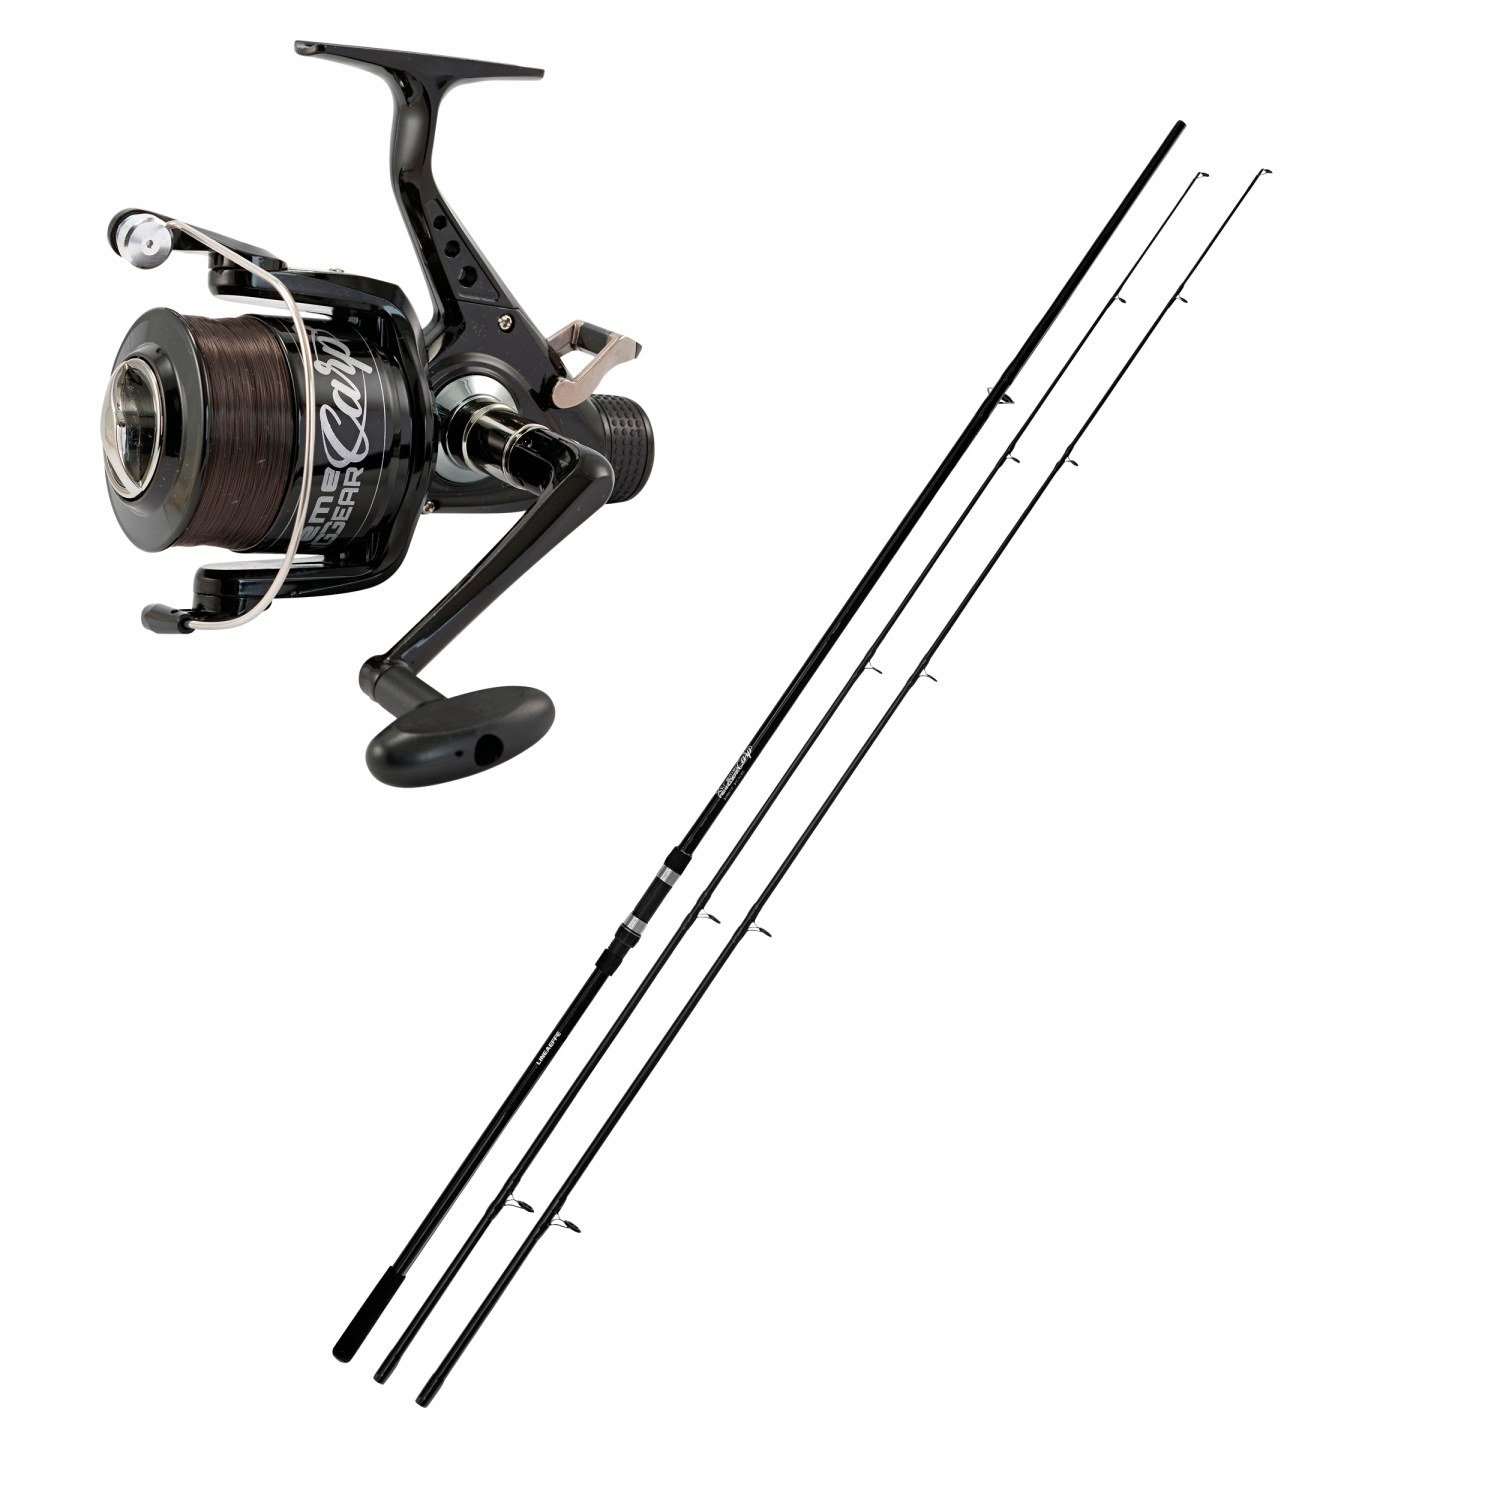 Lineaeffe Combo Carp at low prices